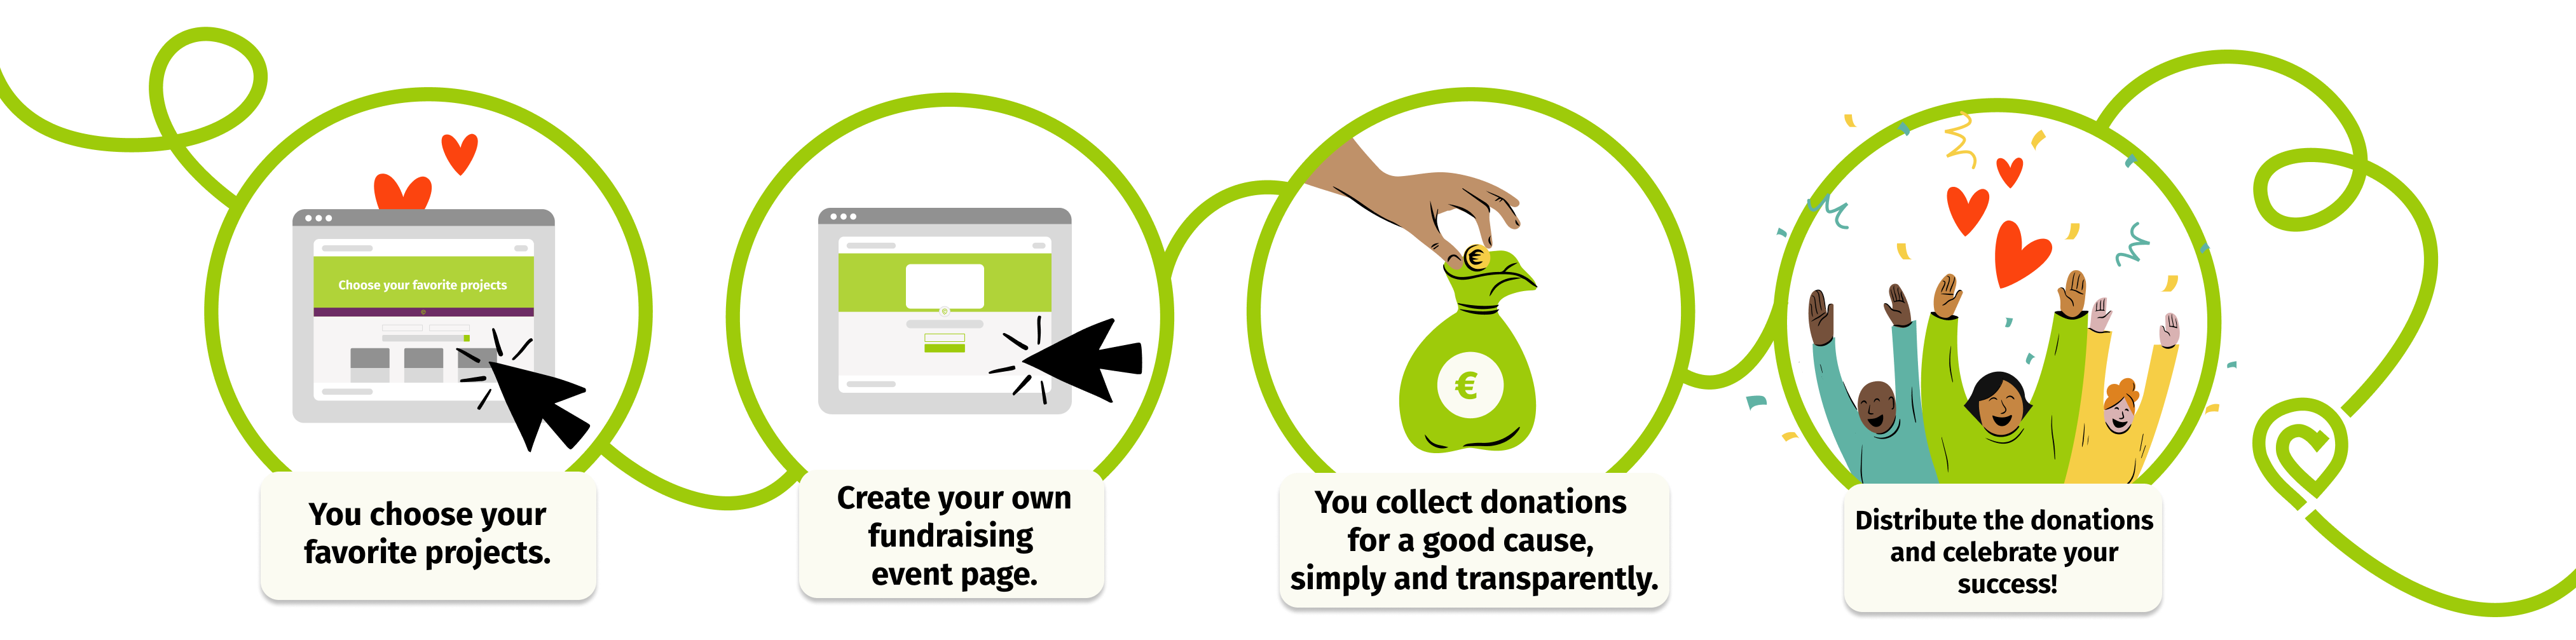 Here is an illustration-style infographic consisting of four circles arranged horizontally, showing the steps of how to start and communicate a fundraising campaign. The first circle shows a website in which a mouse pointer clicks on a fundraising project. Below this is a text panel with the content 'You choose your favorite projects'. In the second circle, a fundraising page is shown, below which is a text panel with the content 'Create your own fundraising event page'. In circle number 3, a money bag is shown into which a hand is inserting a coin from above. The text field below the graphic reads 'You are collecting donations for a good cause, simply and transparently'. Three cheering people are shown in the last circle. Below the graphic is a text panel with the content 'Distribute the donations and celebrate your success'.